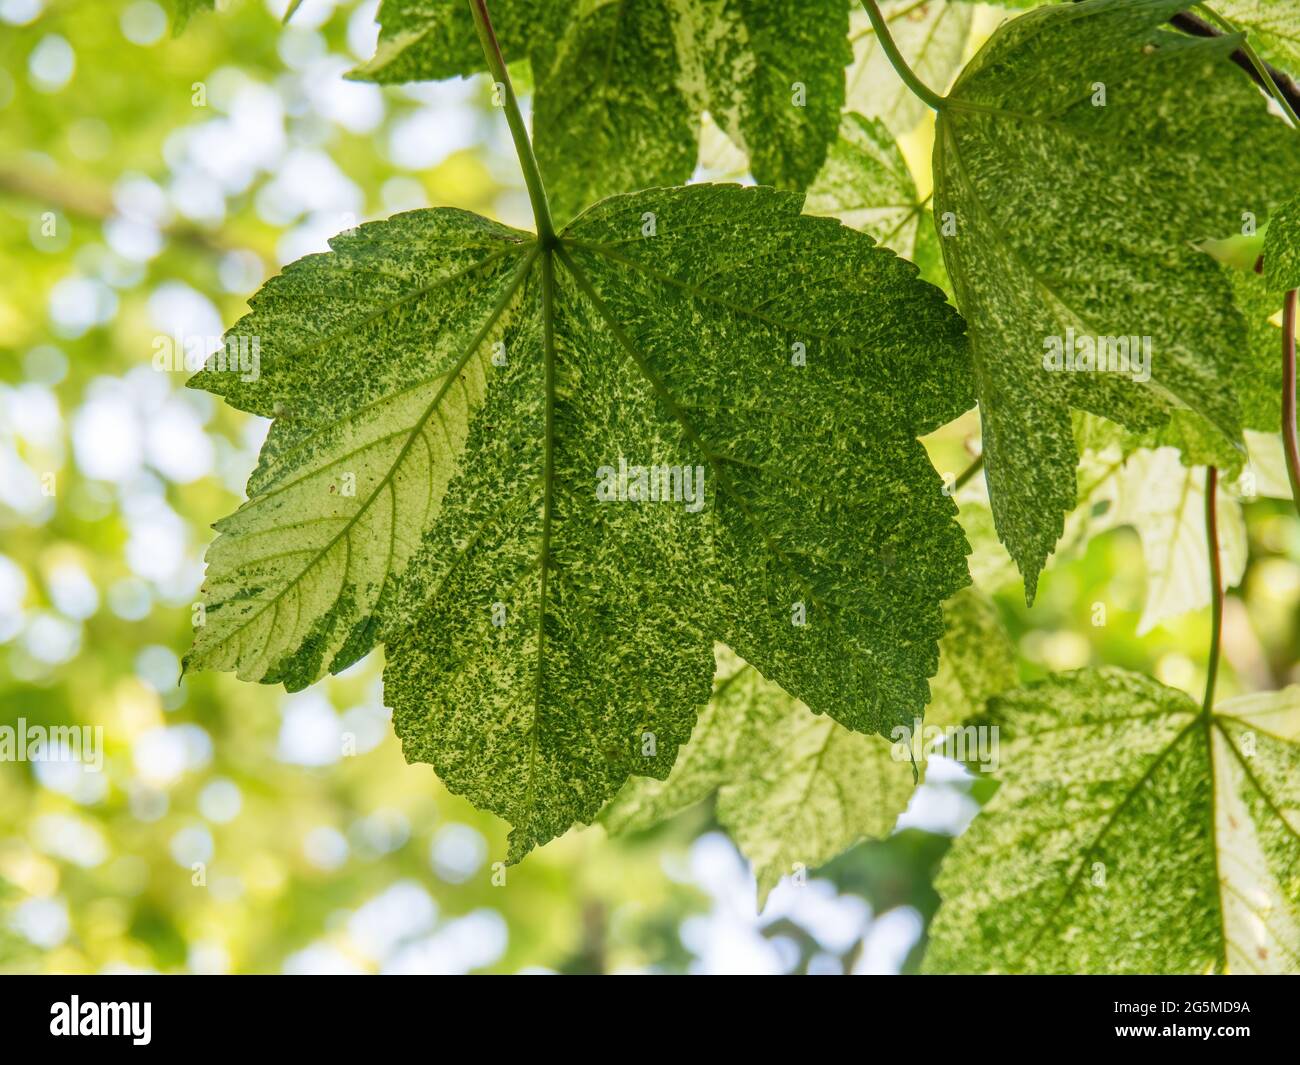 Variegated Sycamore tree leaf, Acer pseudoplatanus with variegated leaves, beautiful patterned foliage. Stock Photo